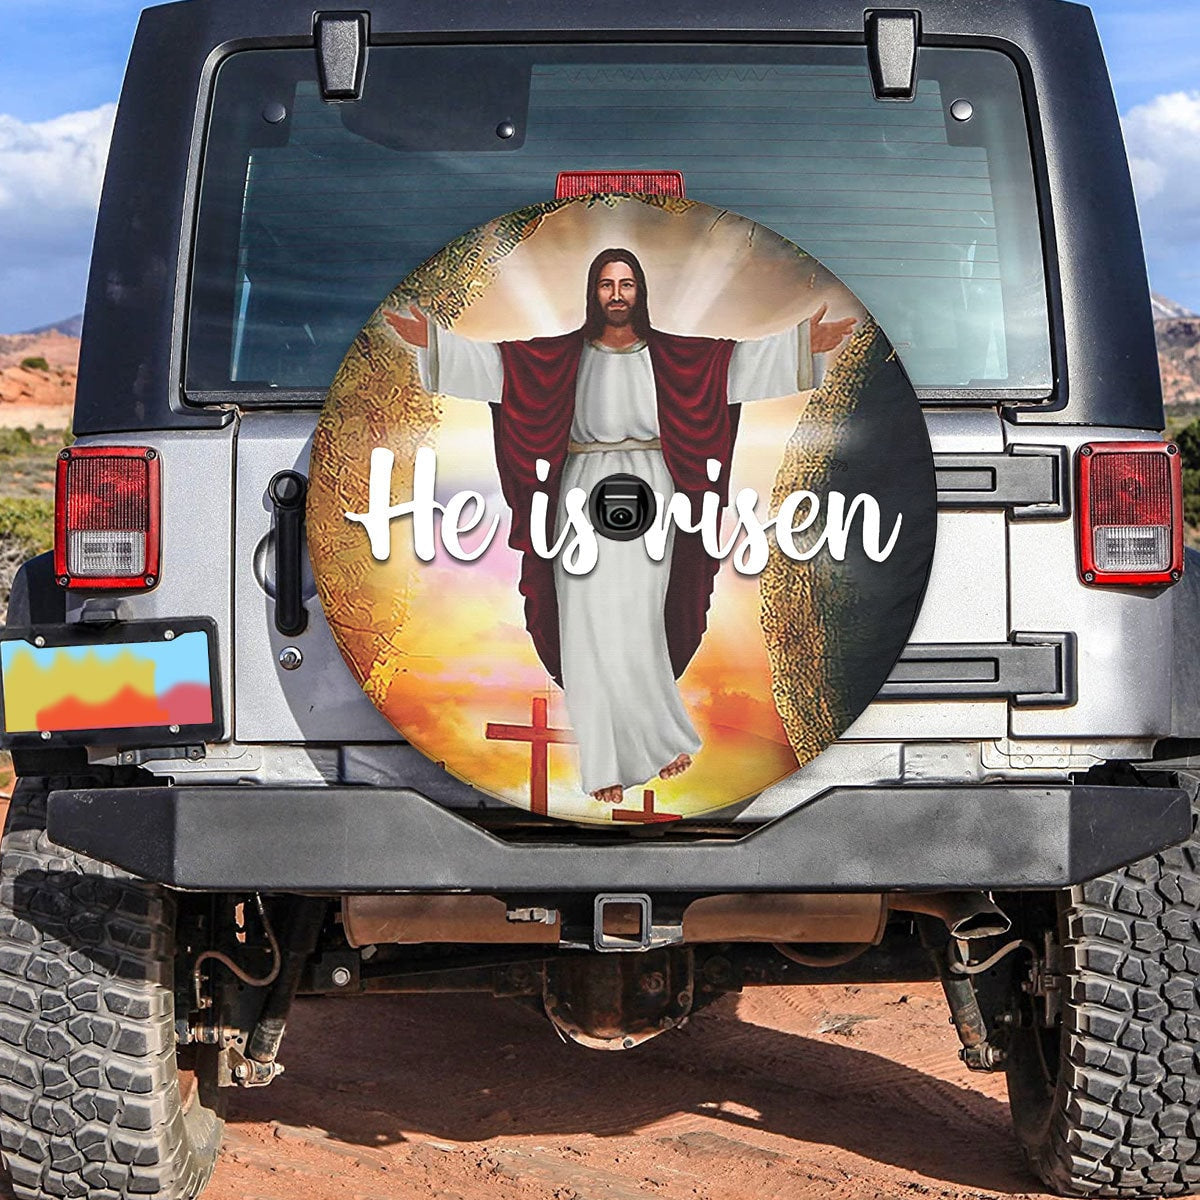 Jesus Christ Spare Tire Cover He Is Risen Tire Cover - Christian Tire Cover